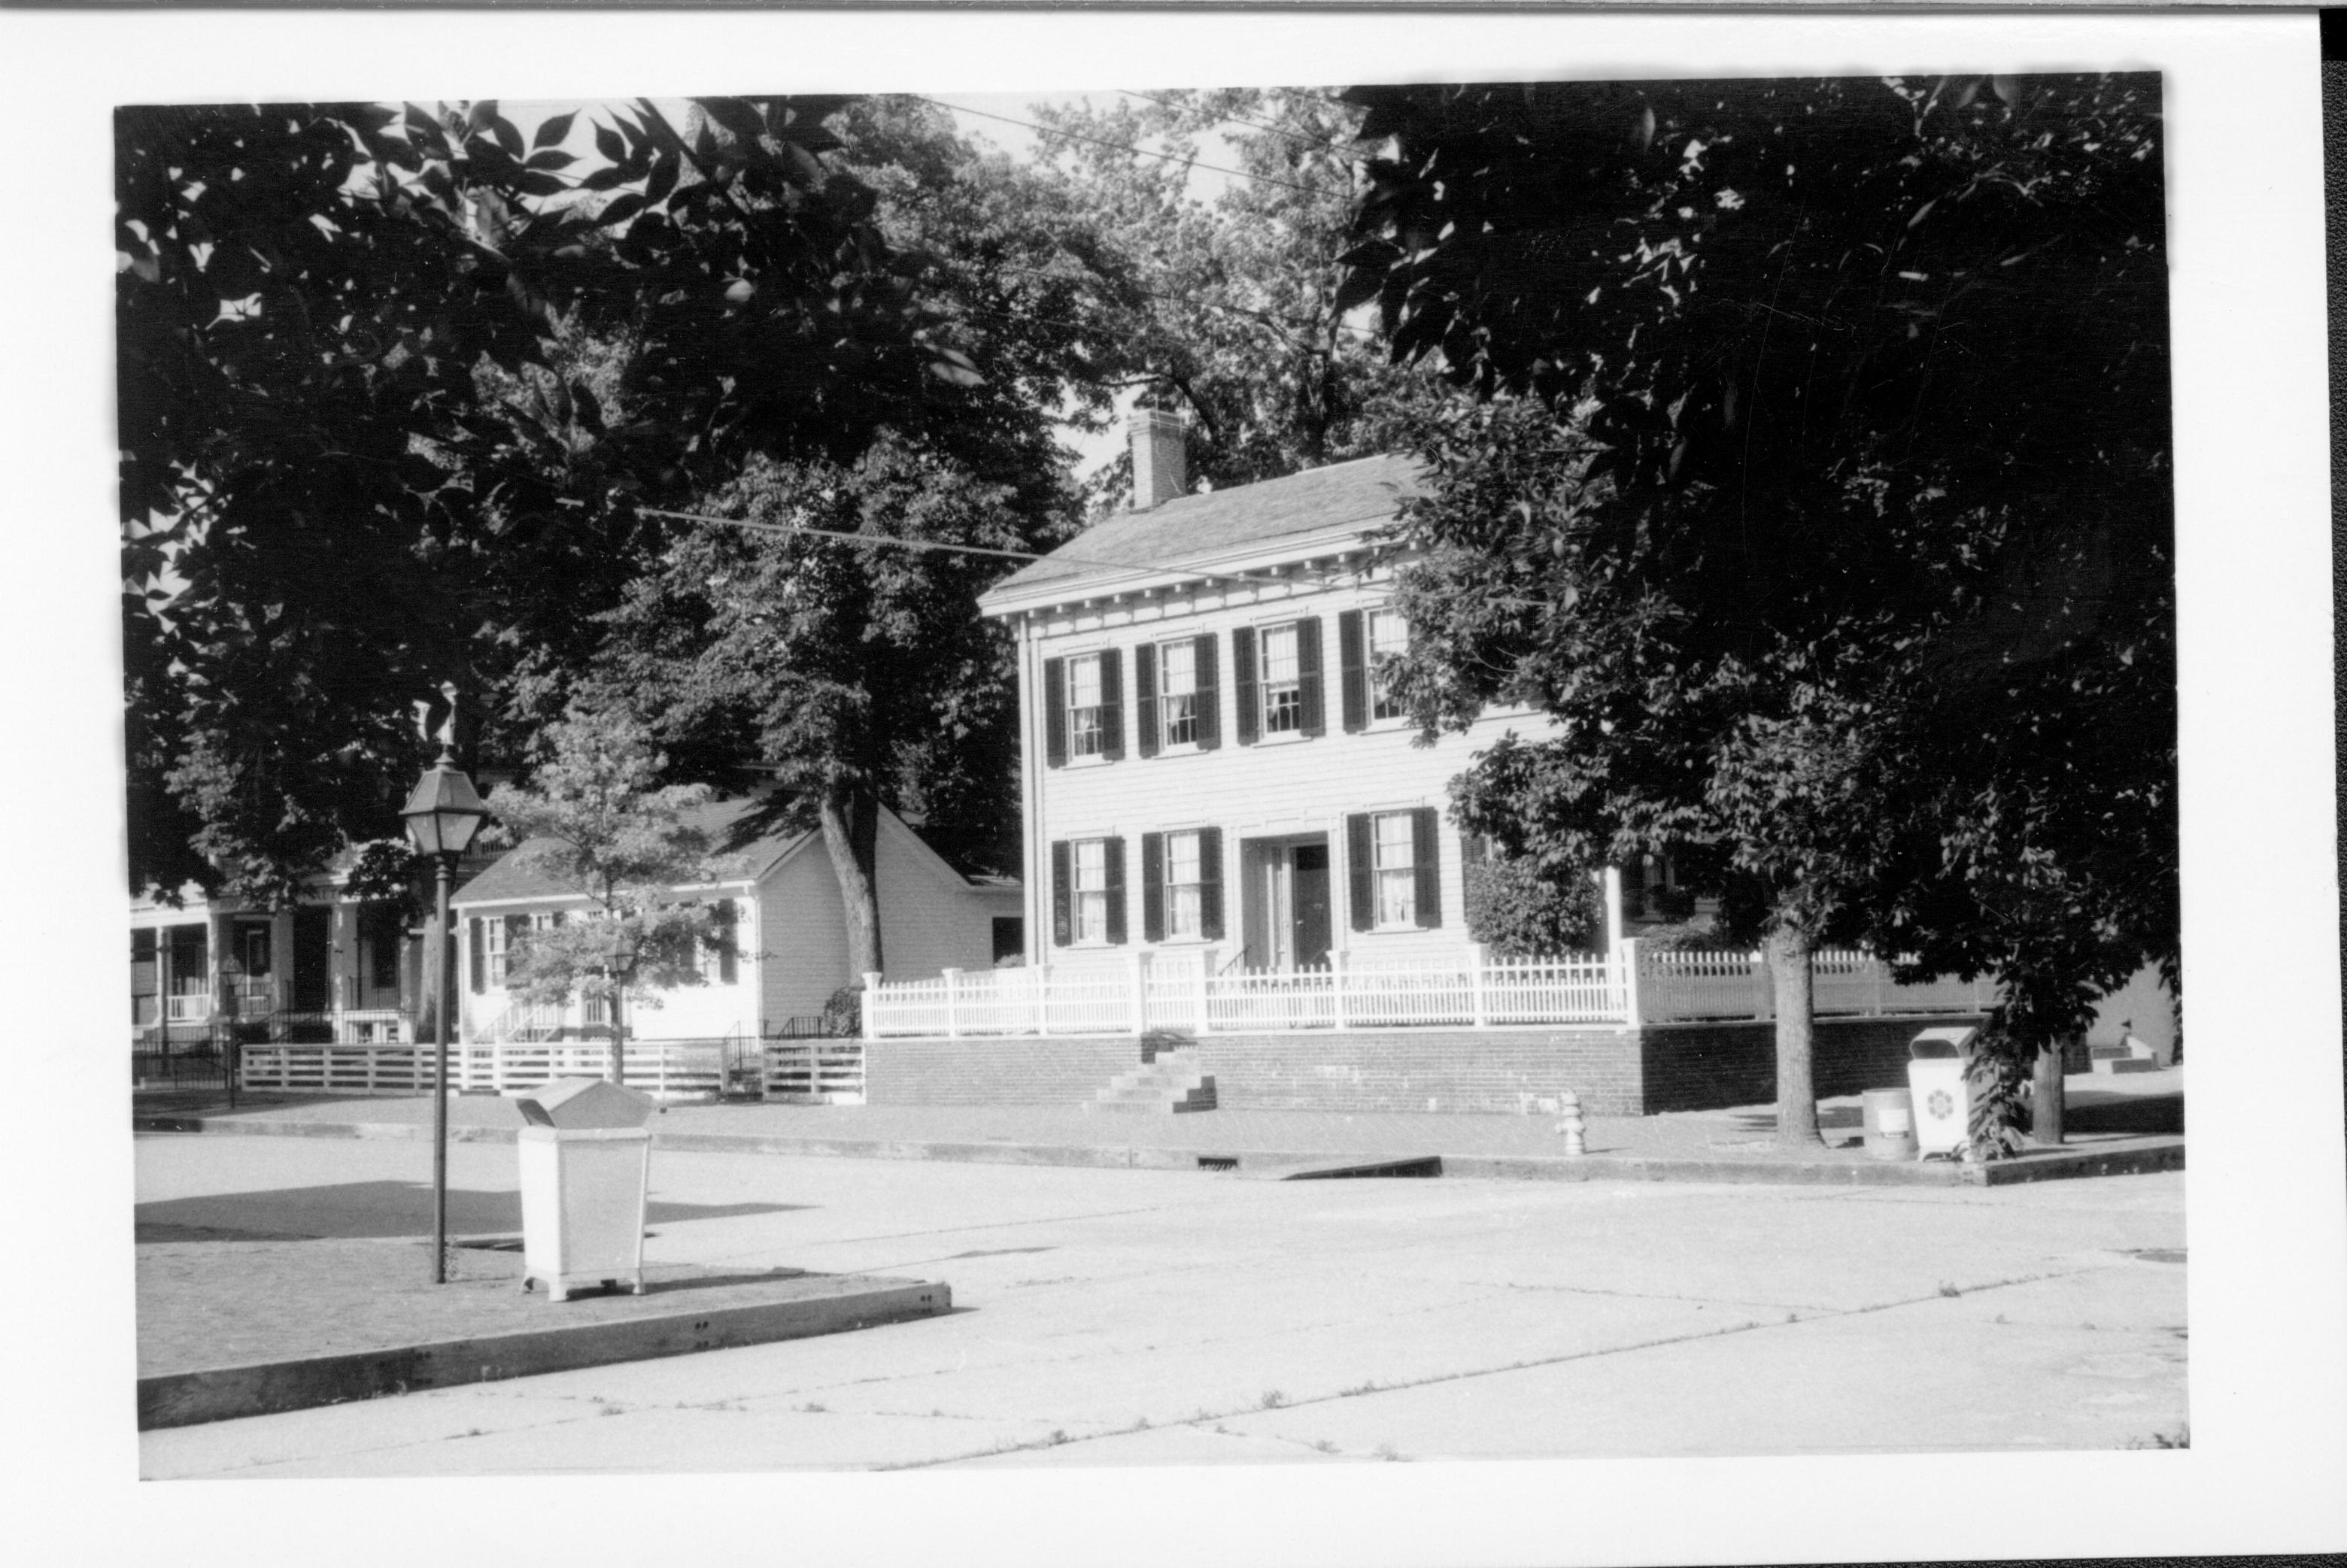 Lincoln Home and neighborhood in summer. Lincoln Home west (front) elevation behind closed gate.  Corneau House on left with other houses visible on Bugg (Block 10, Lot 5) and Niles (Block 10, Lot 4) lots.  Trash cans and street light on corners, fire hydrant near street by Lincoln Home.  Paved 8th and Jackson Streets. Looking Northeast from just off 8th and Jackson Street intersections. Lincoln Home, Corneau, Bugg, Niles, 8th Street, Jackson Street, fire hydrant, trash cans, painted white